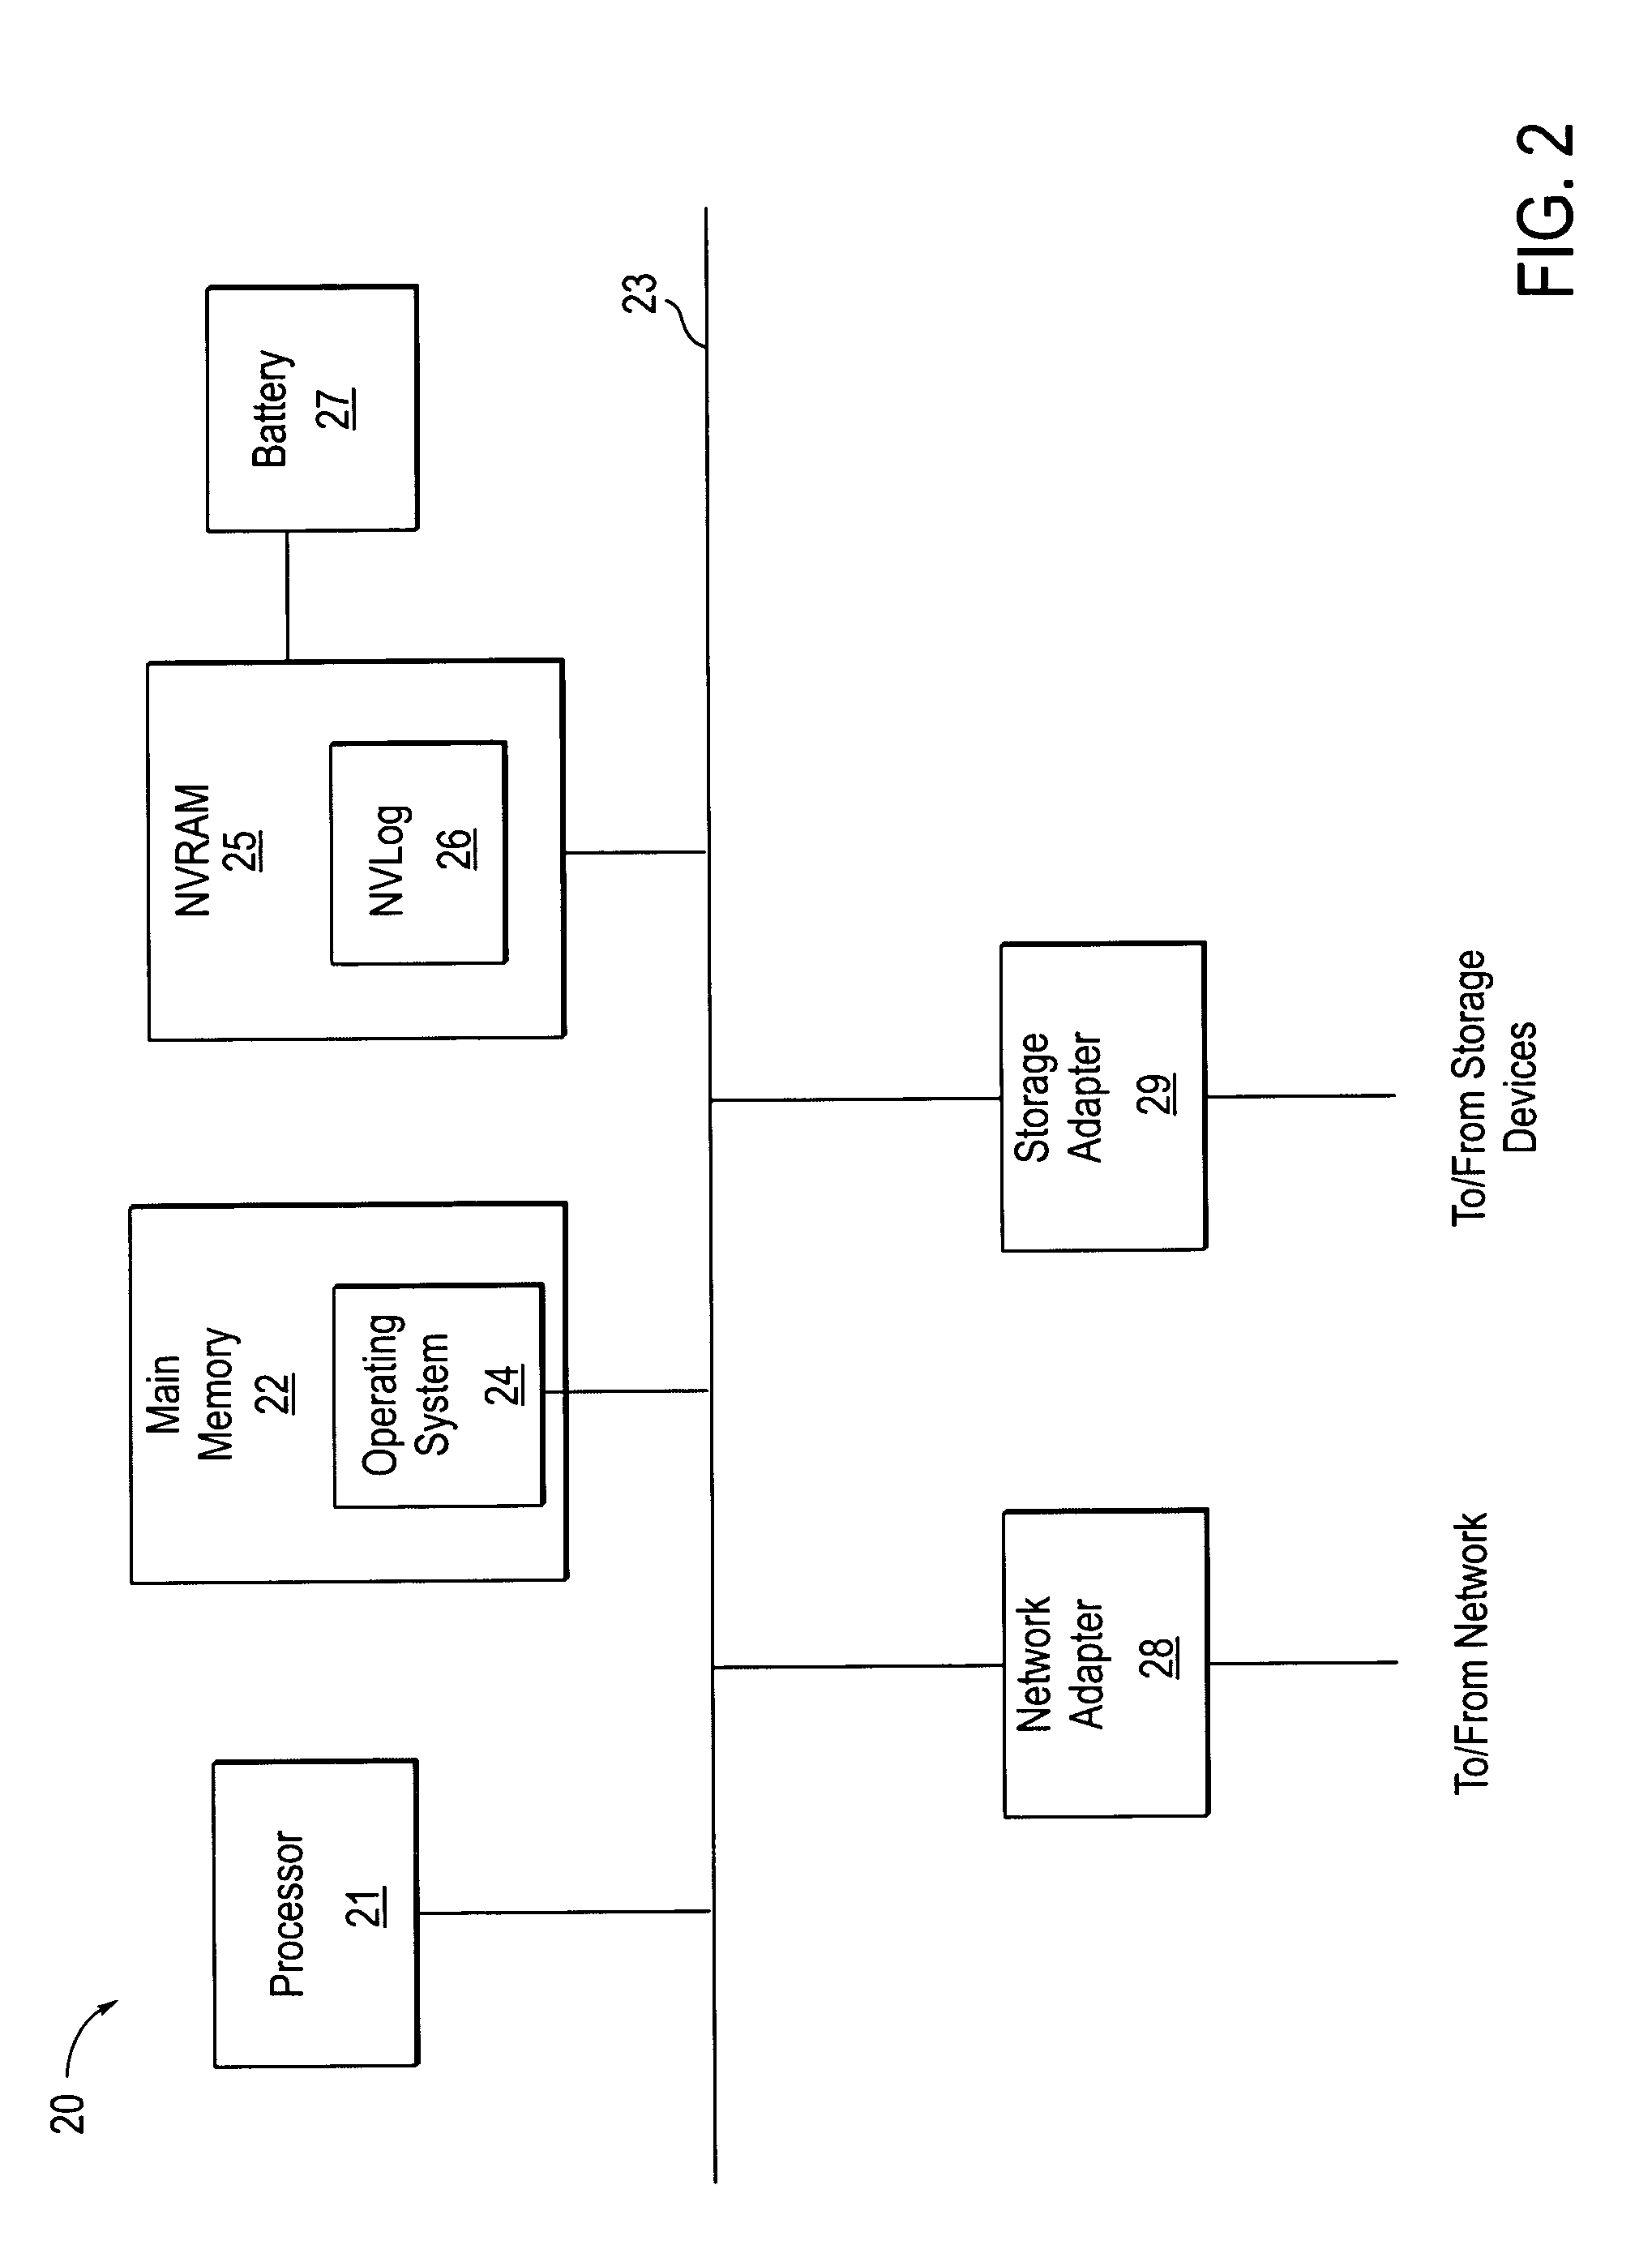 Method and apparatus for reducing network traffic during mass storage synchronization phase of synchronous data mirroring